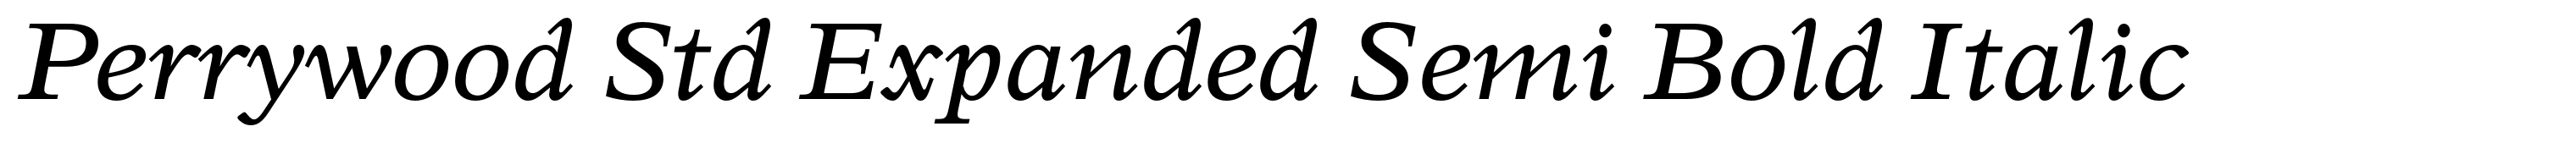 Perrywood Std Expanded Semi Bold Italic